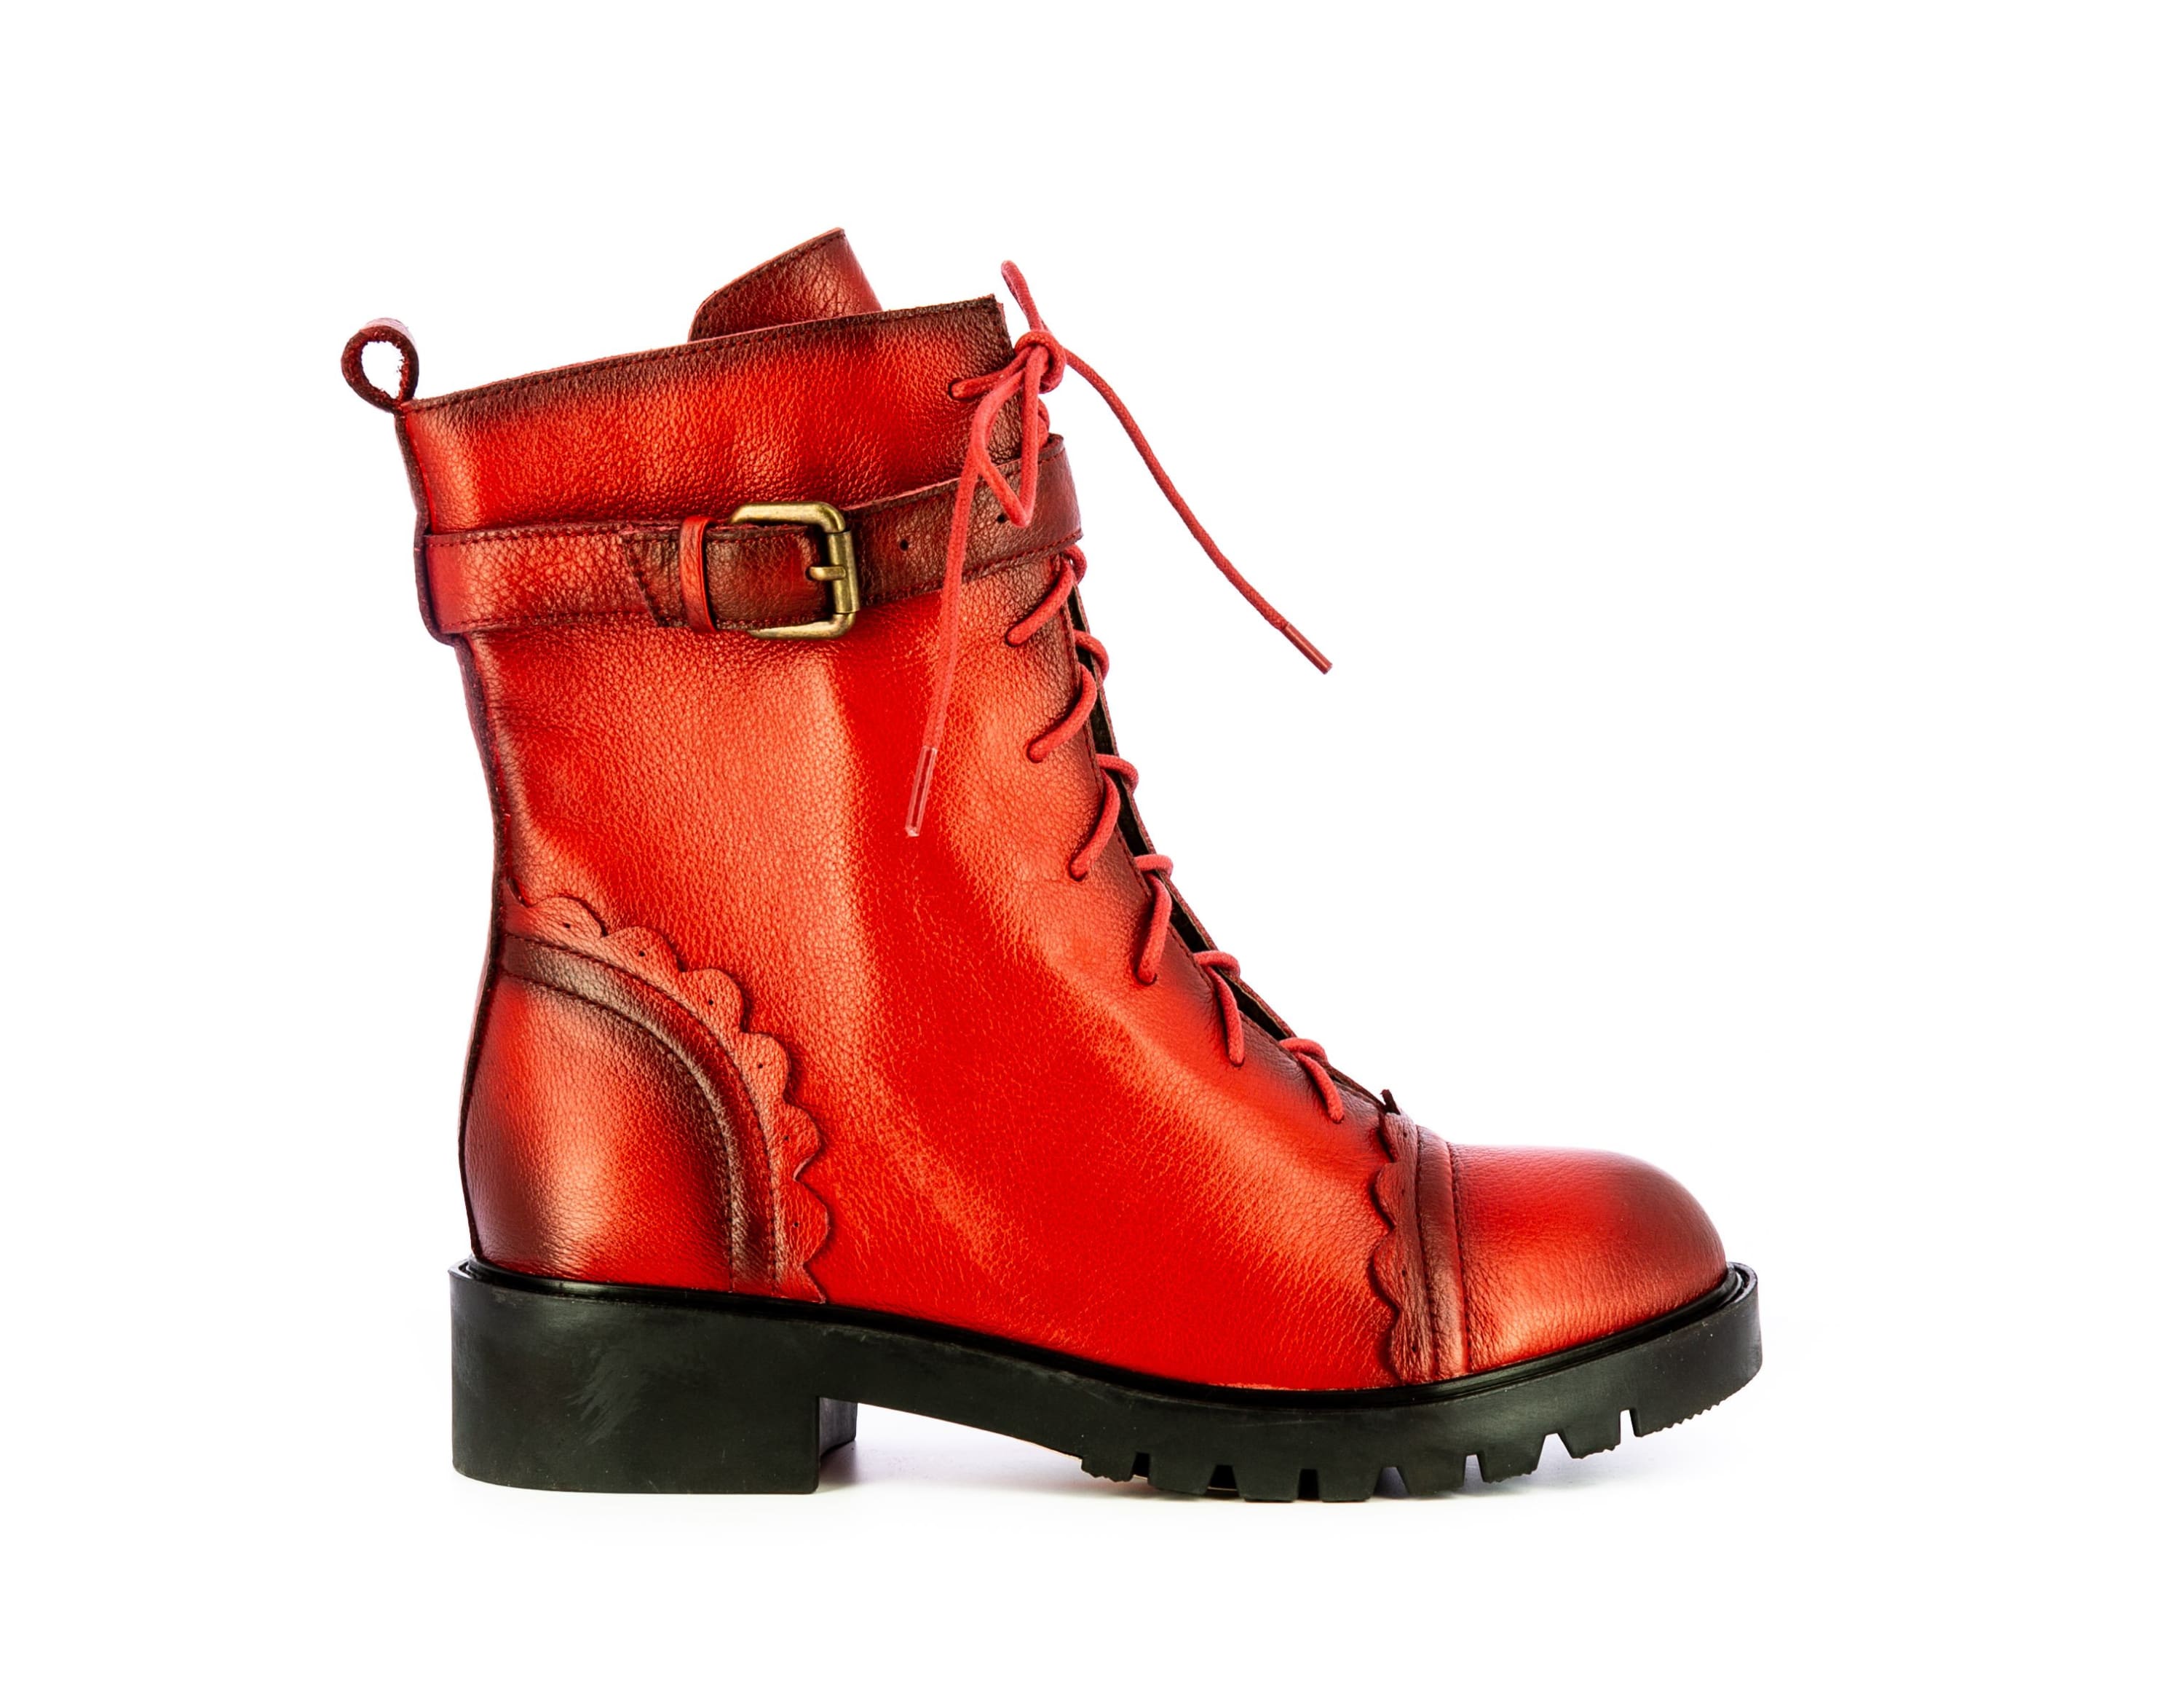 Chaussure IDCRISSAO 23 - 35 / Rouge - Boots